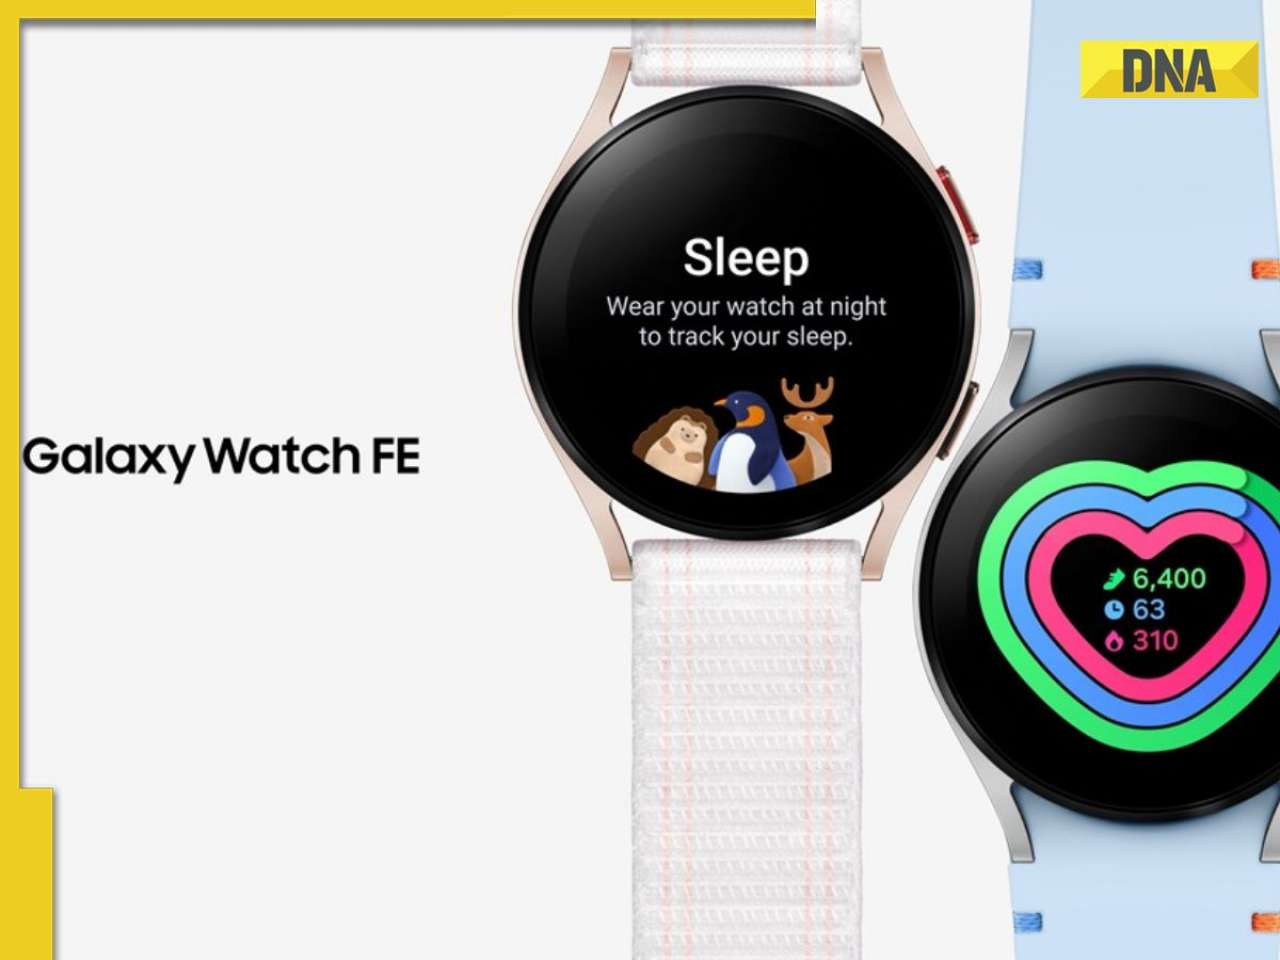 Samsung Galaxy Watch FE breaks cover, new entry level smartwatch launching on…